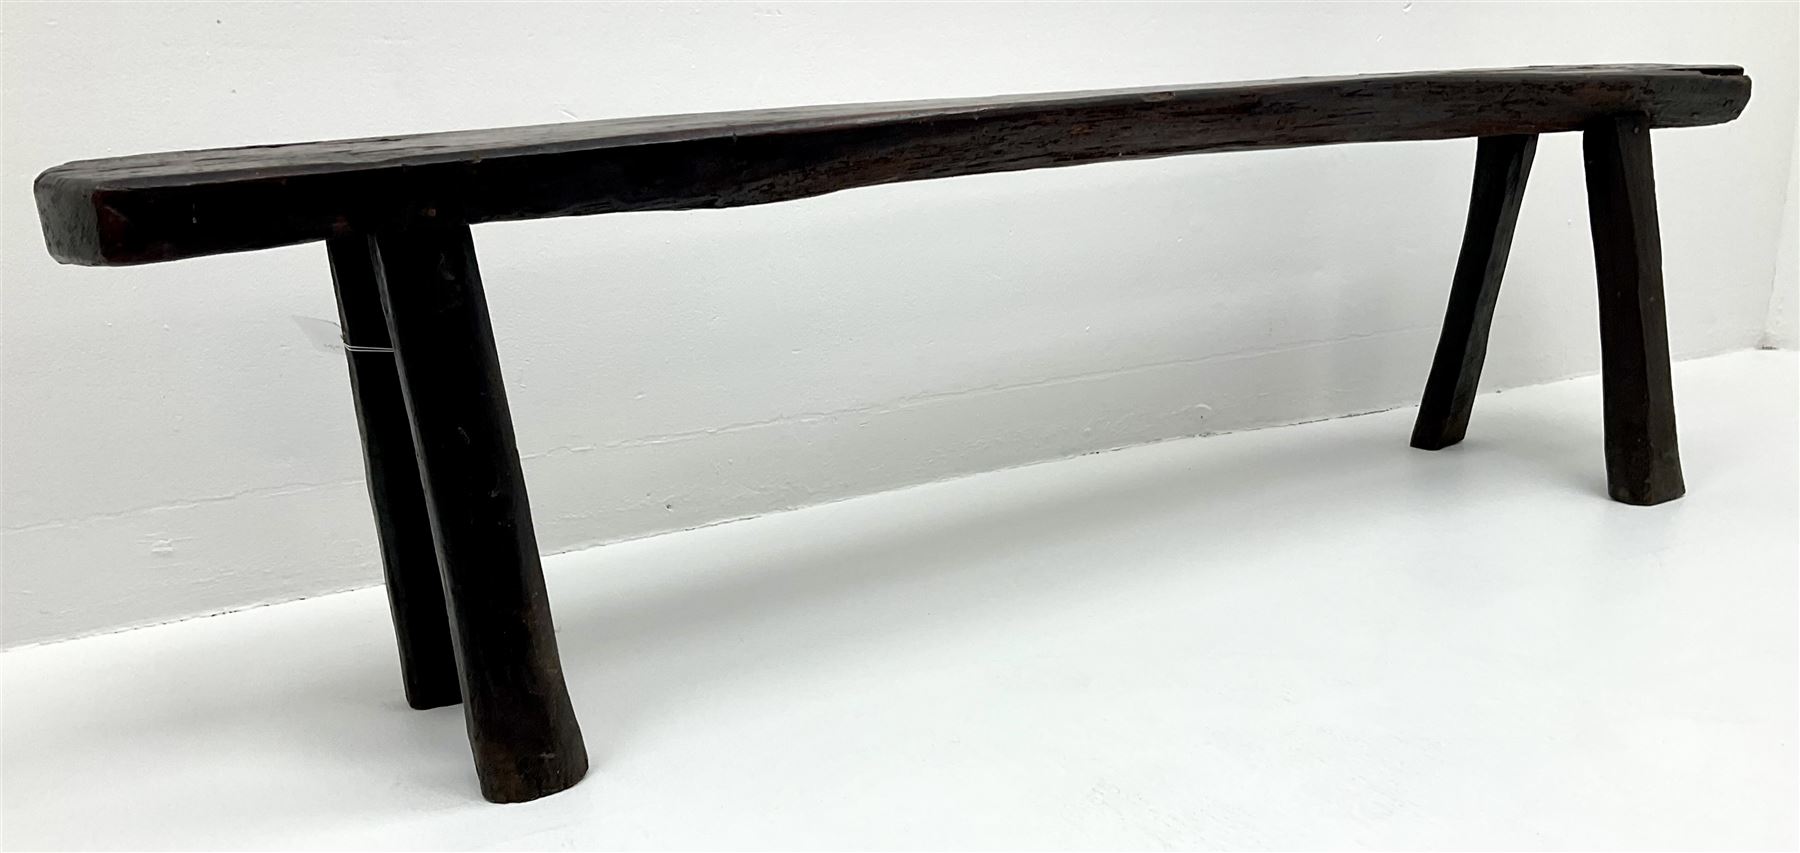 18th/19th century vernacular rustic oak plank bench on four splayed supports - Image 2 of 2